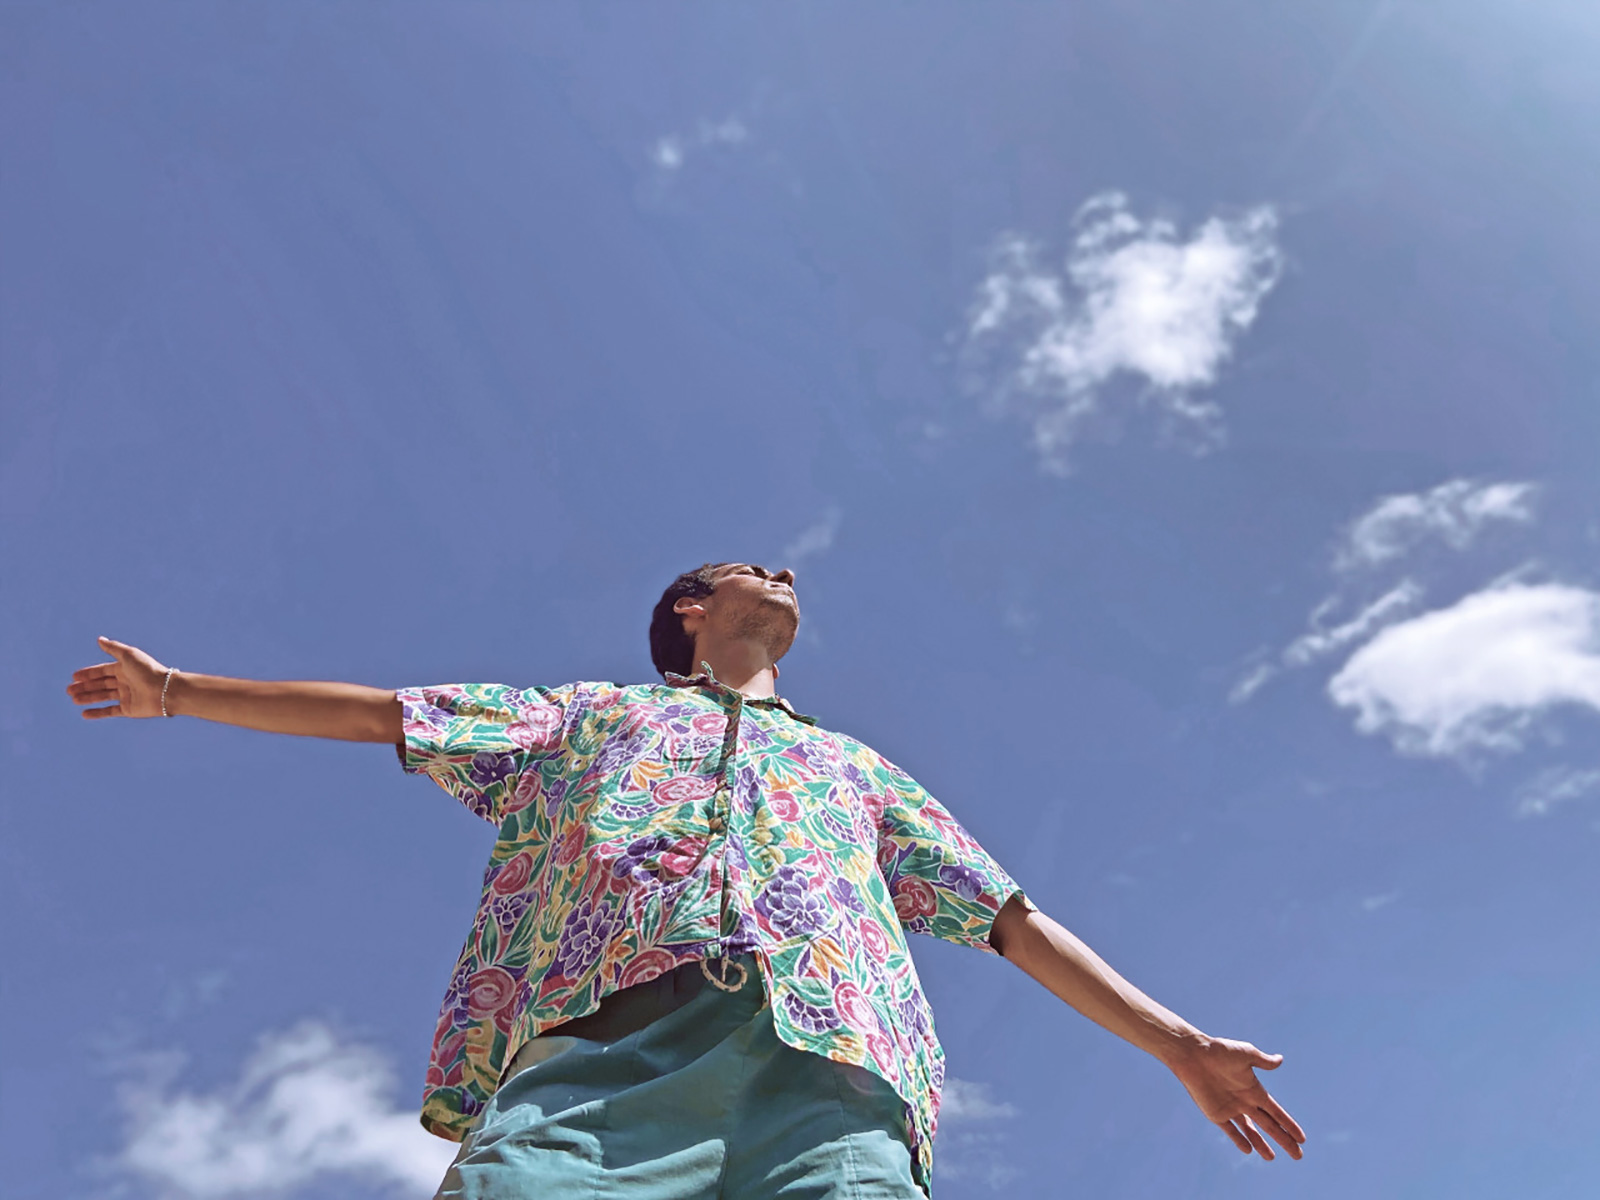 A photograph of a man raising his arms to a blue sky.